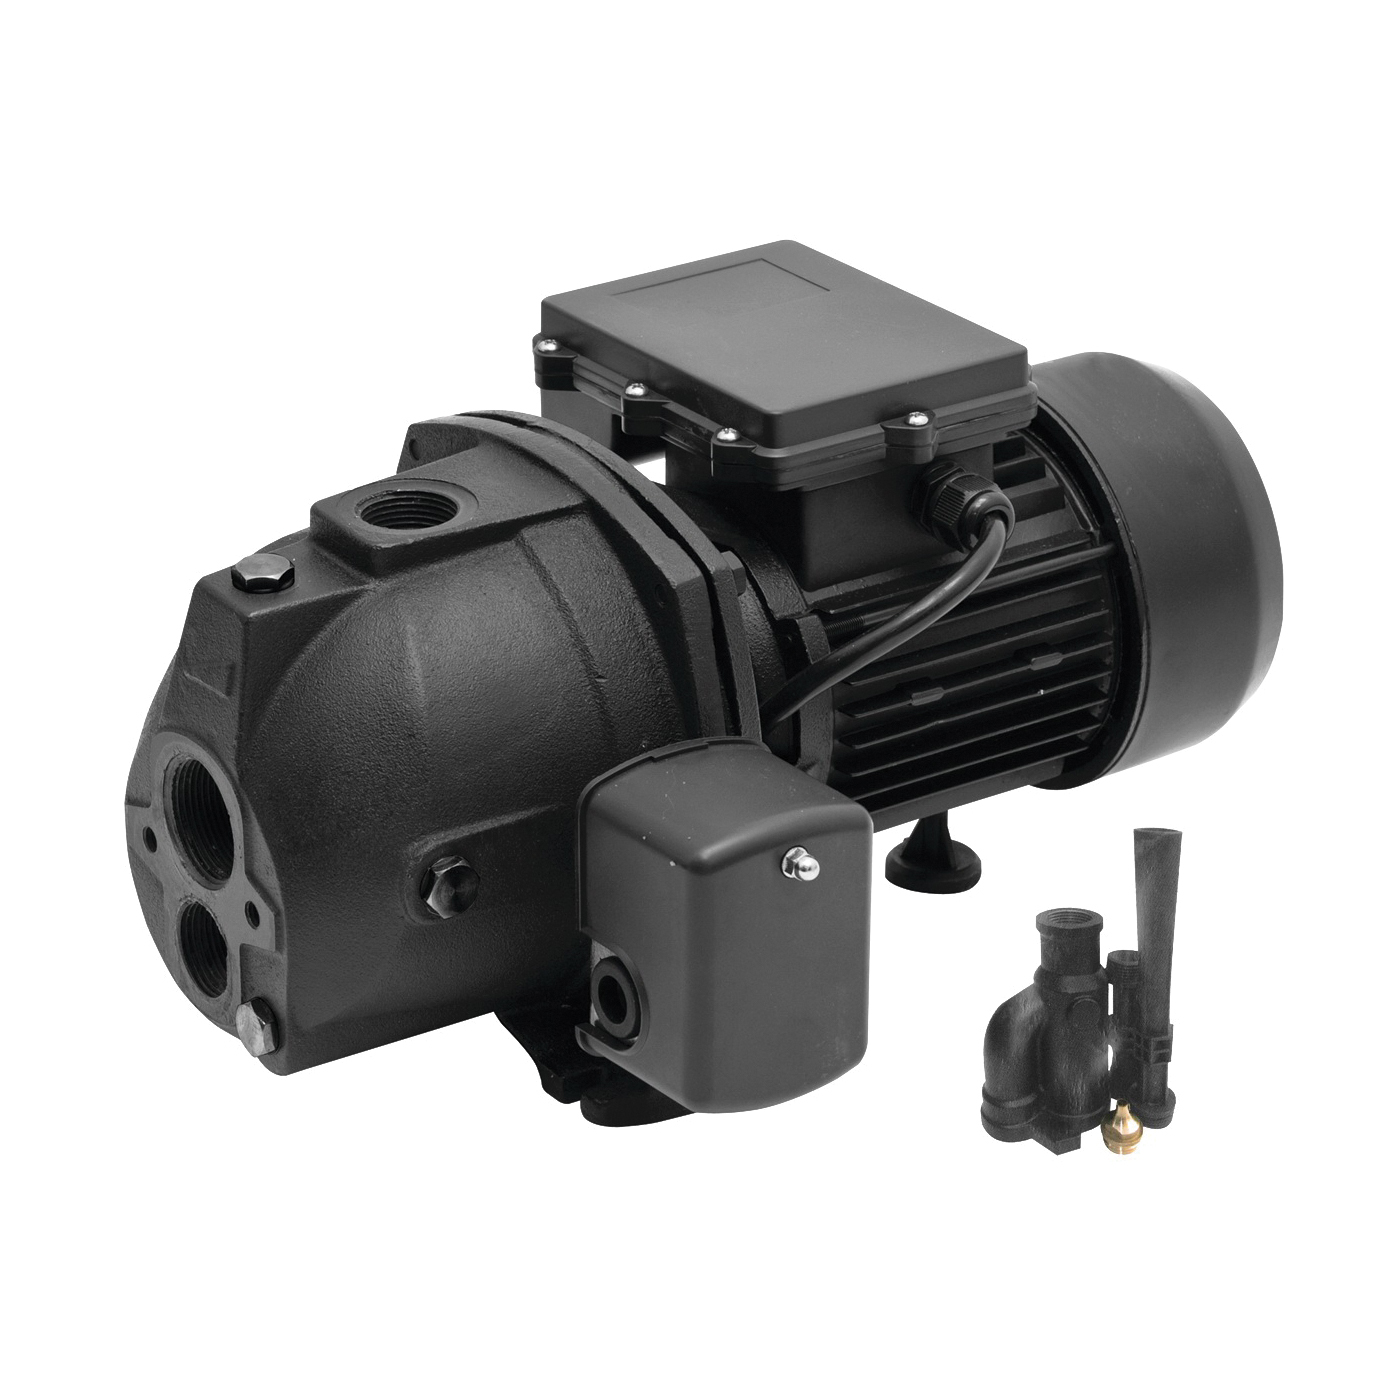 94515 Jet Pump, 6.4/3.2 A, 115/230 V, 0.5 hp, 1-1/4 in Suction, 1 in Discharge Connection, 25 ft Max Head